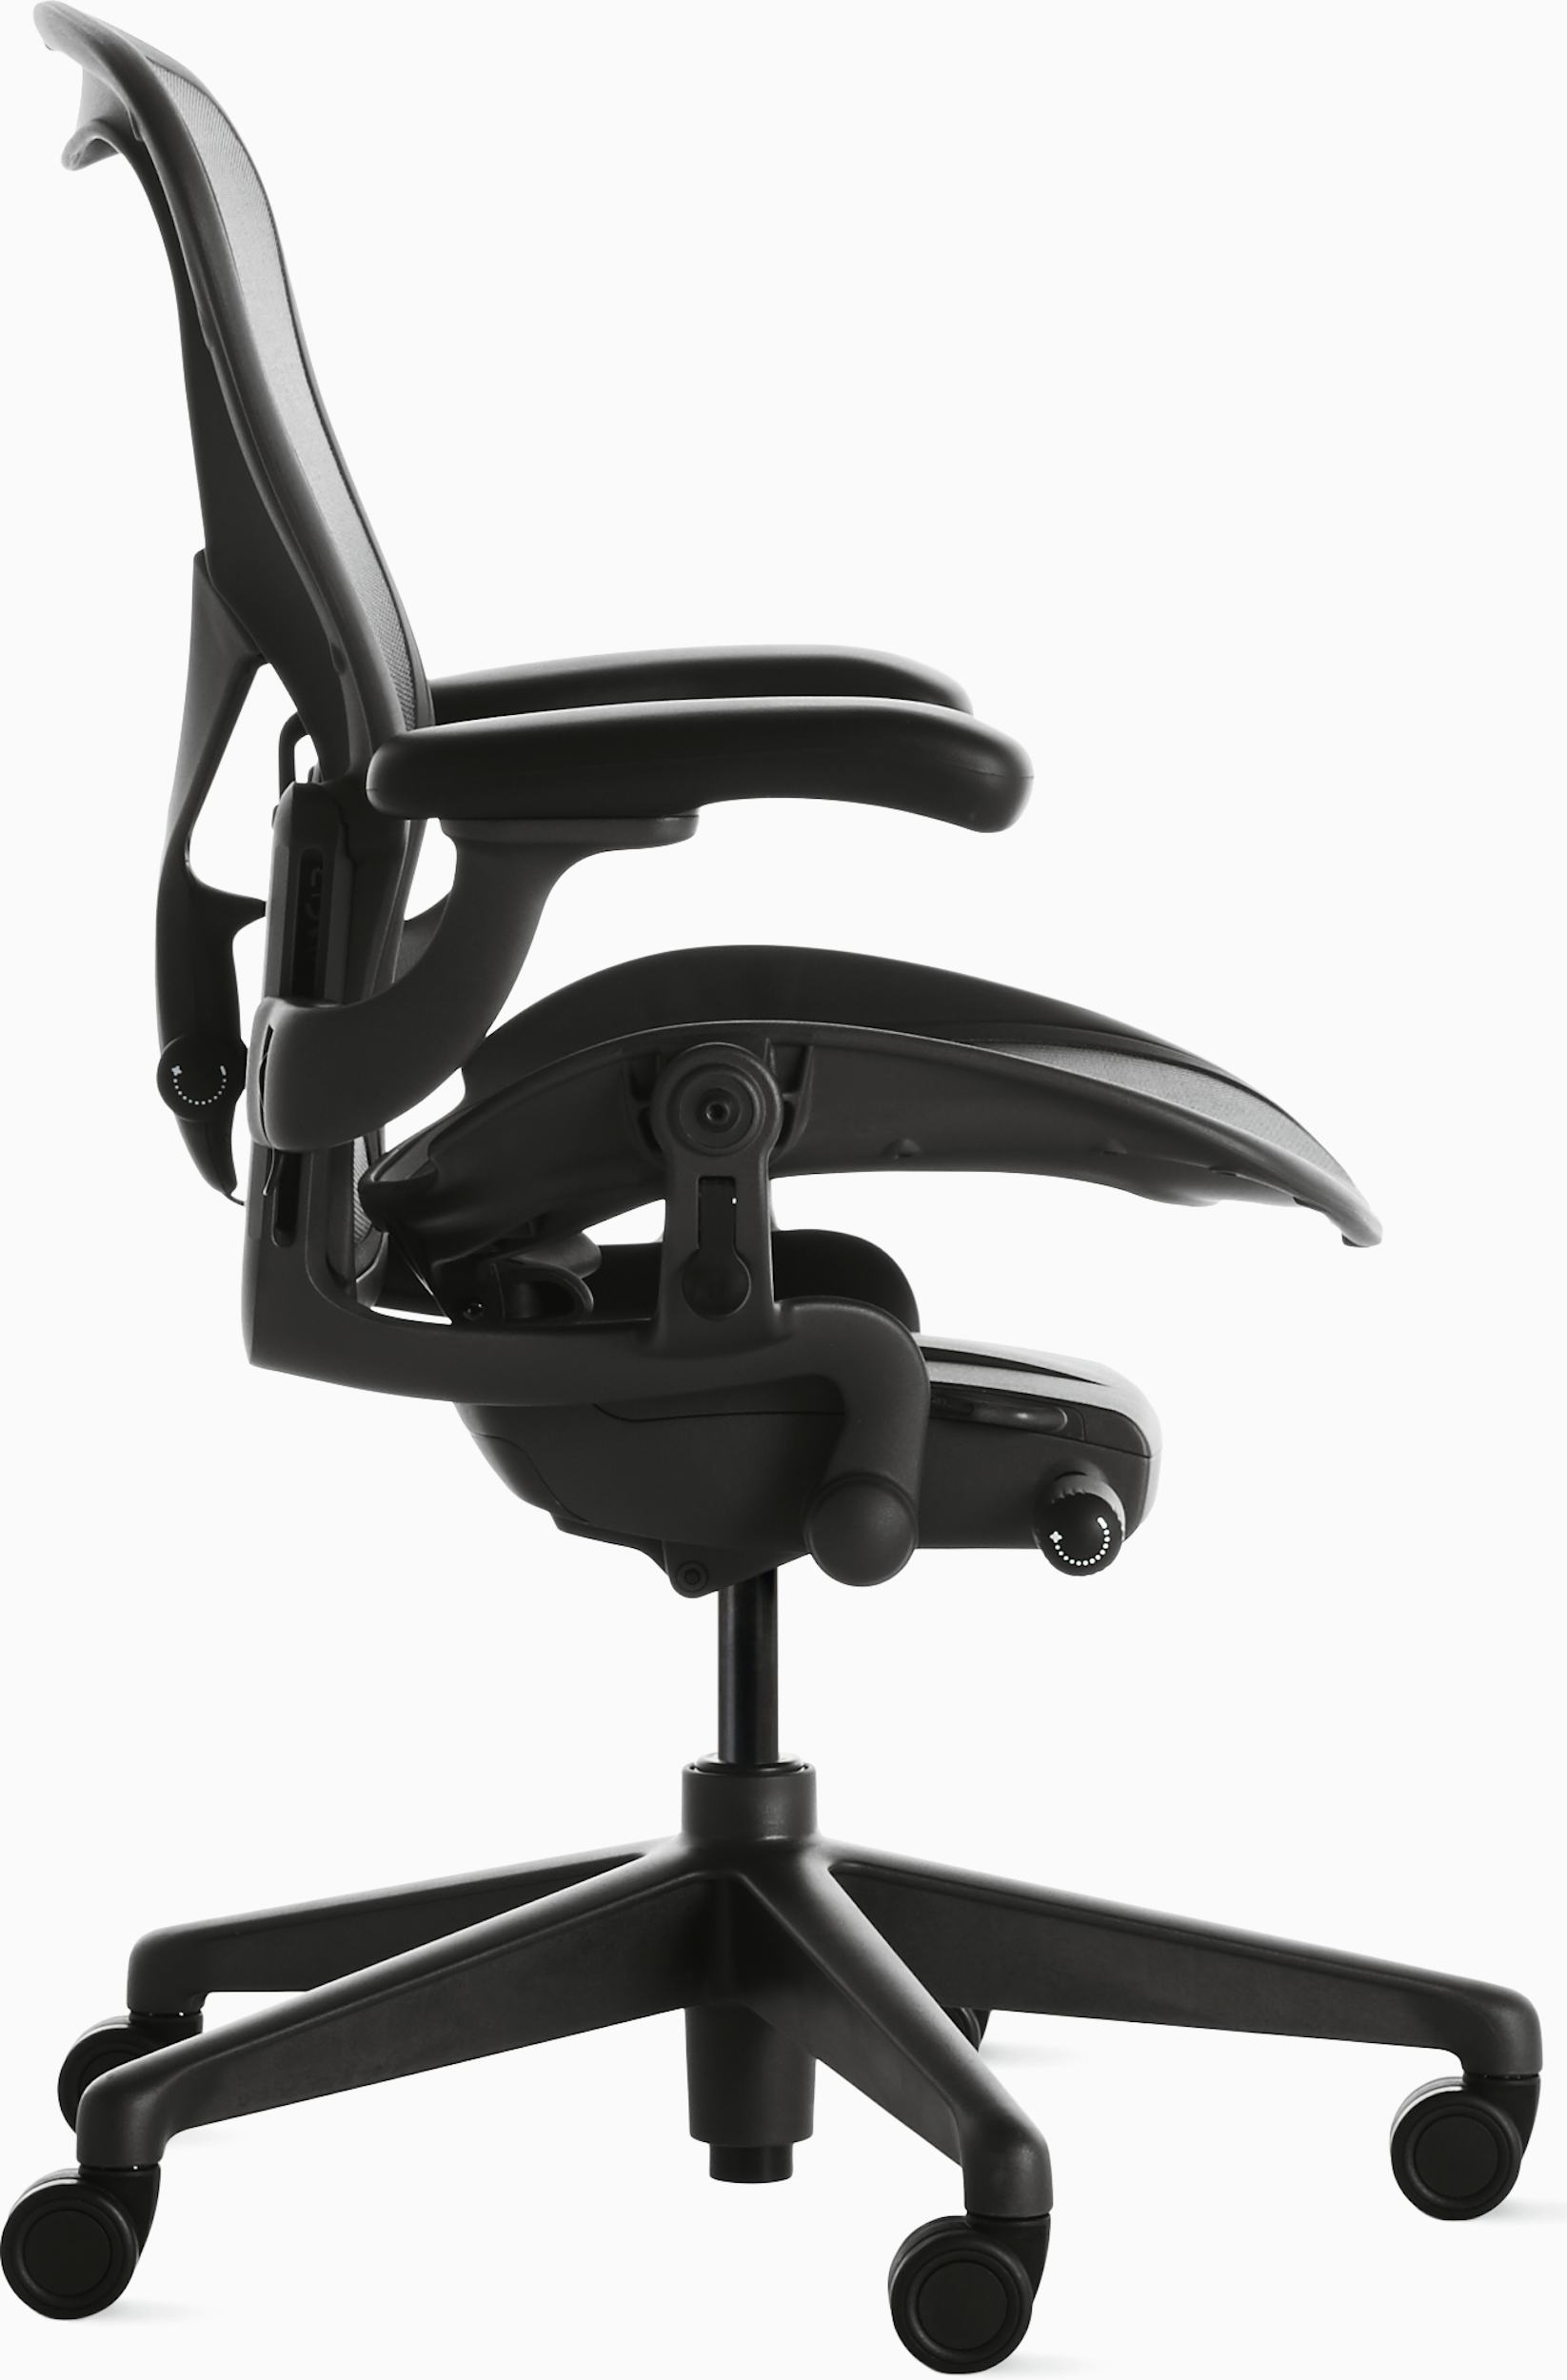 Real Living Gray Fabric Office Chair